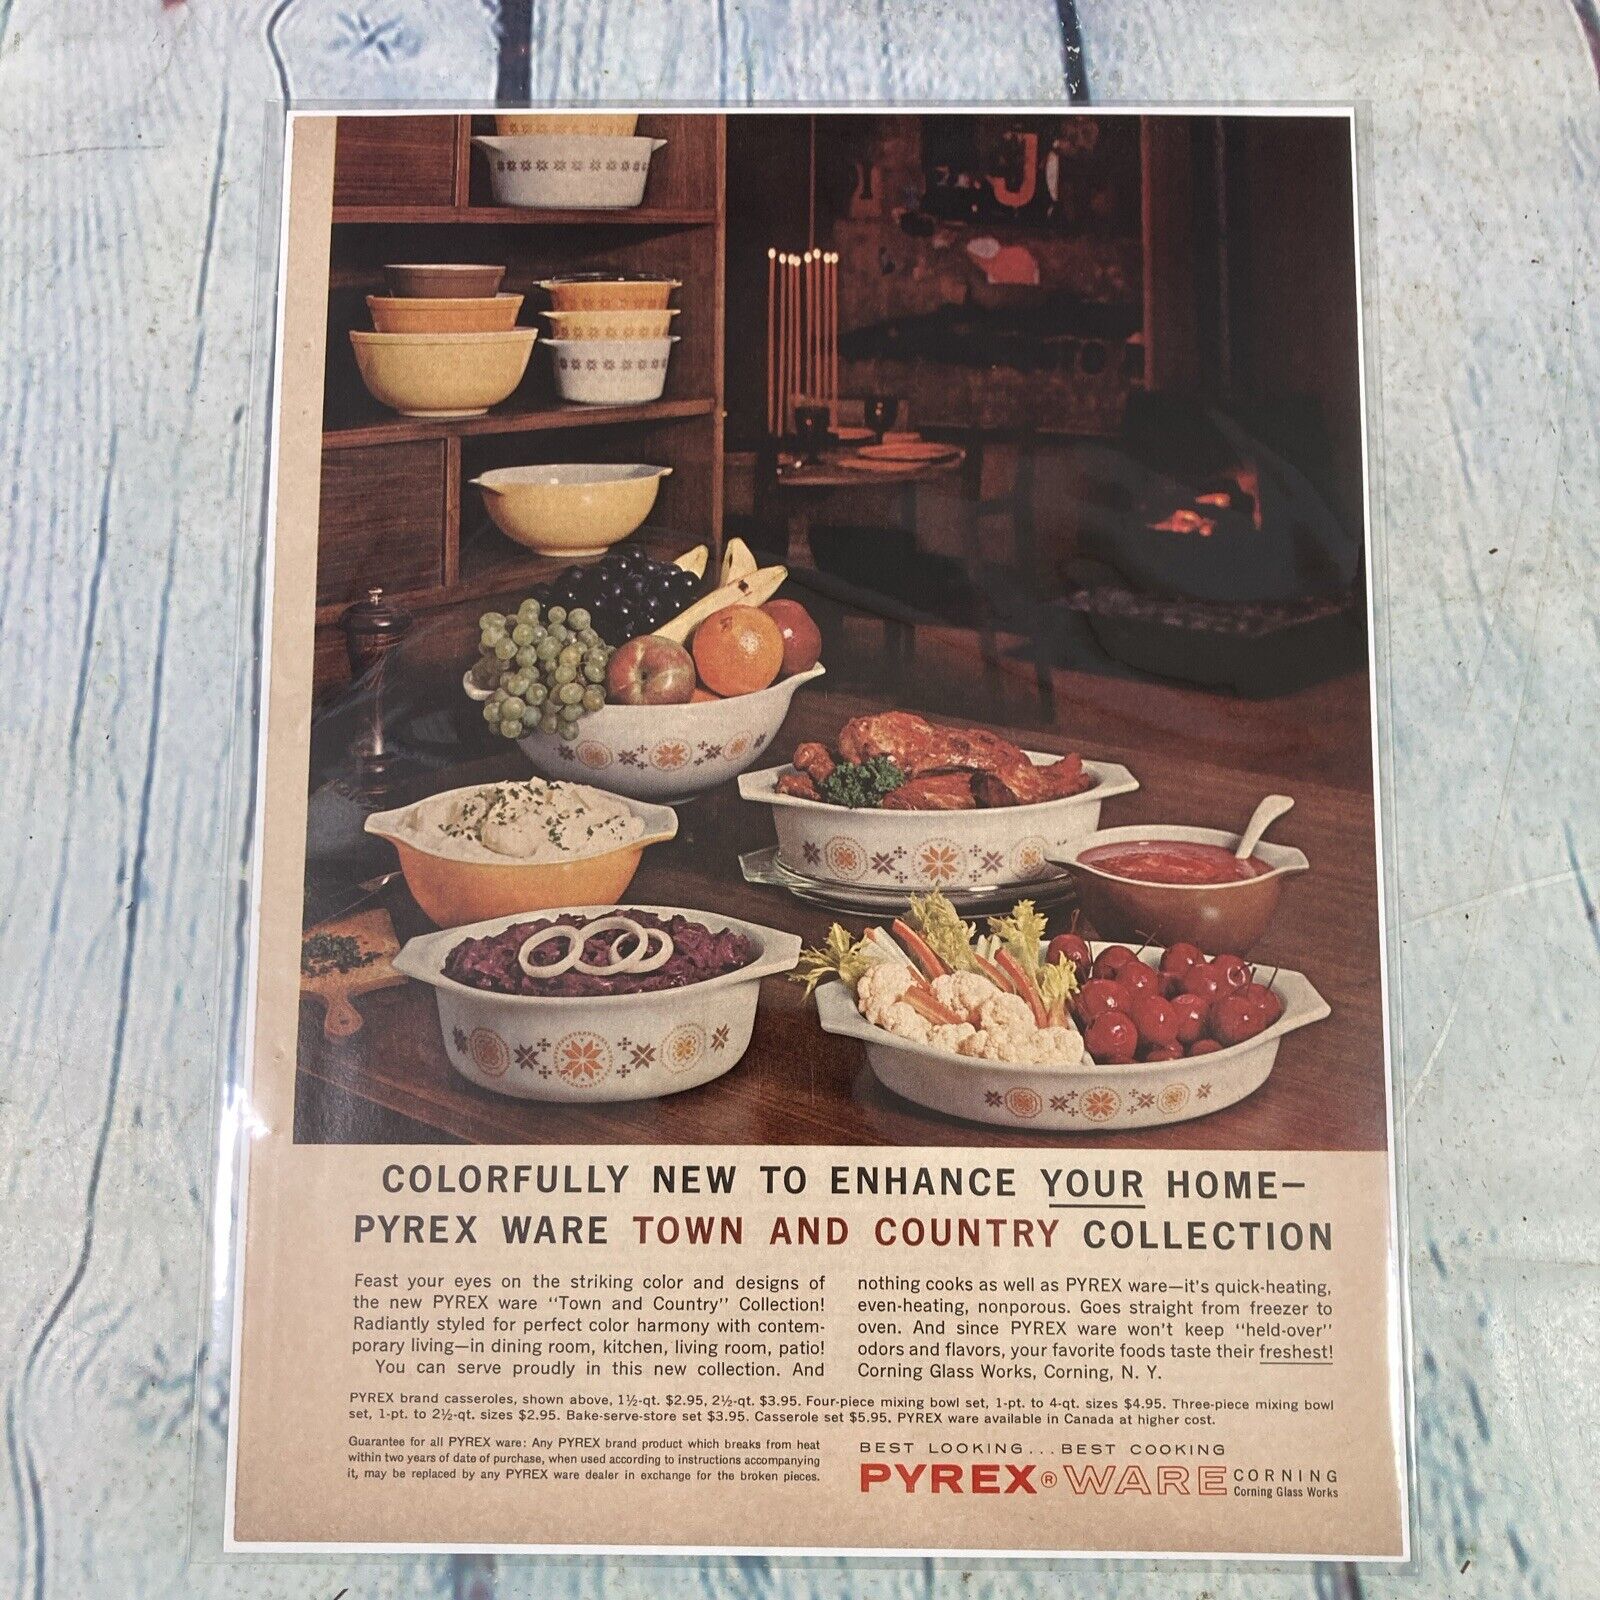 1963 Pyrex Ware Town and Country Vintage Print Ad/Poster Promo Art Kitchen